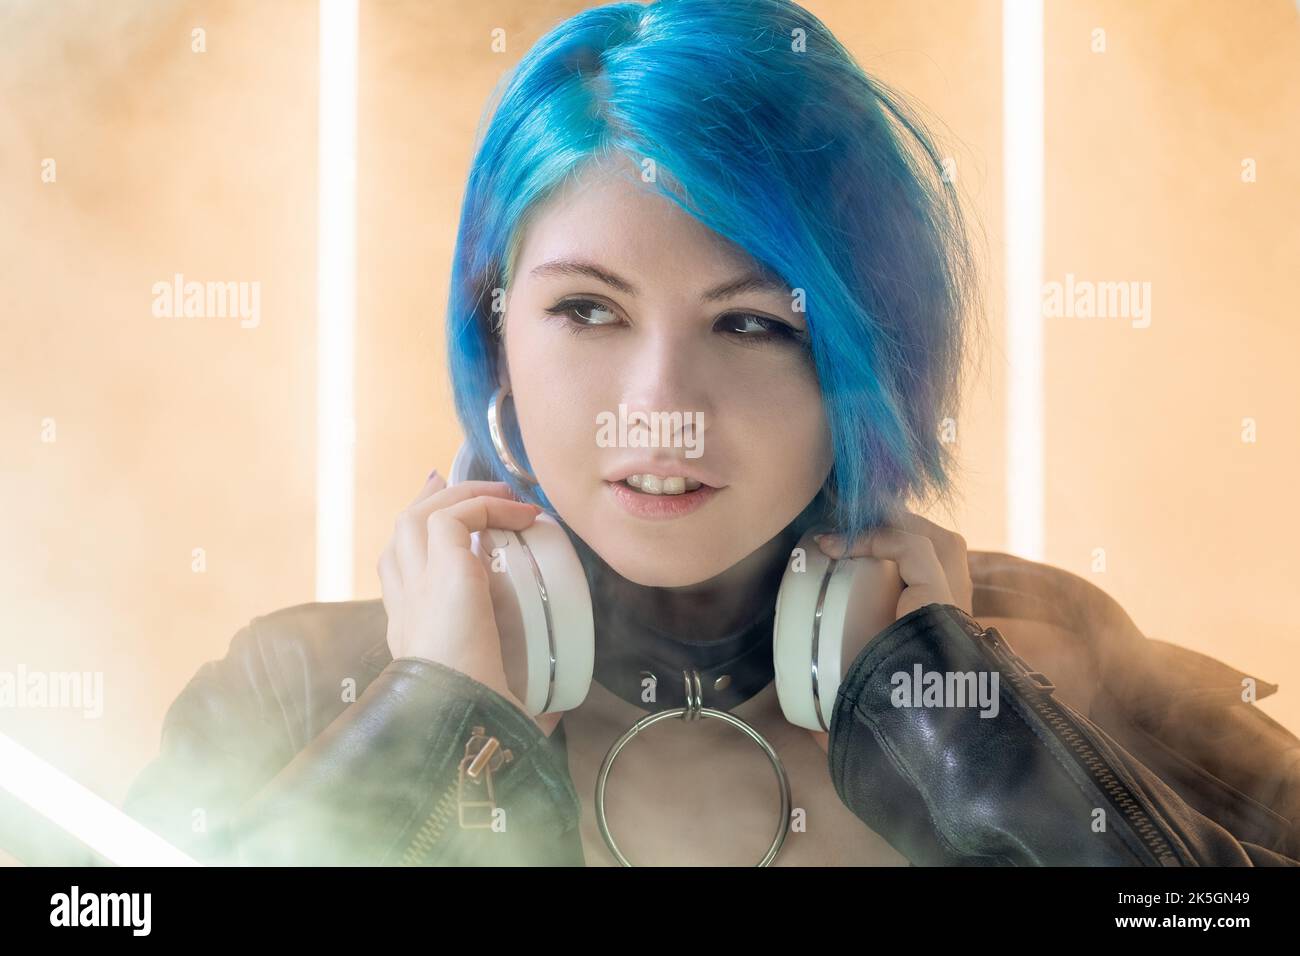 Woman DJ. Night life. Futuristic party. Pretty smiling cyberpunk young girl with headphones in LED lamp light smoke nightclub background. Stock Photo